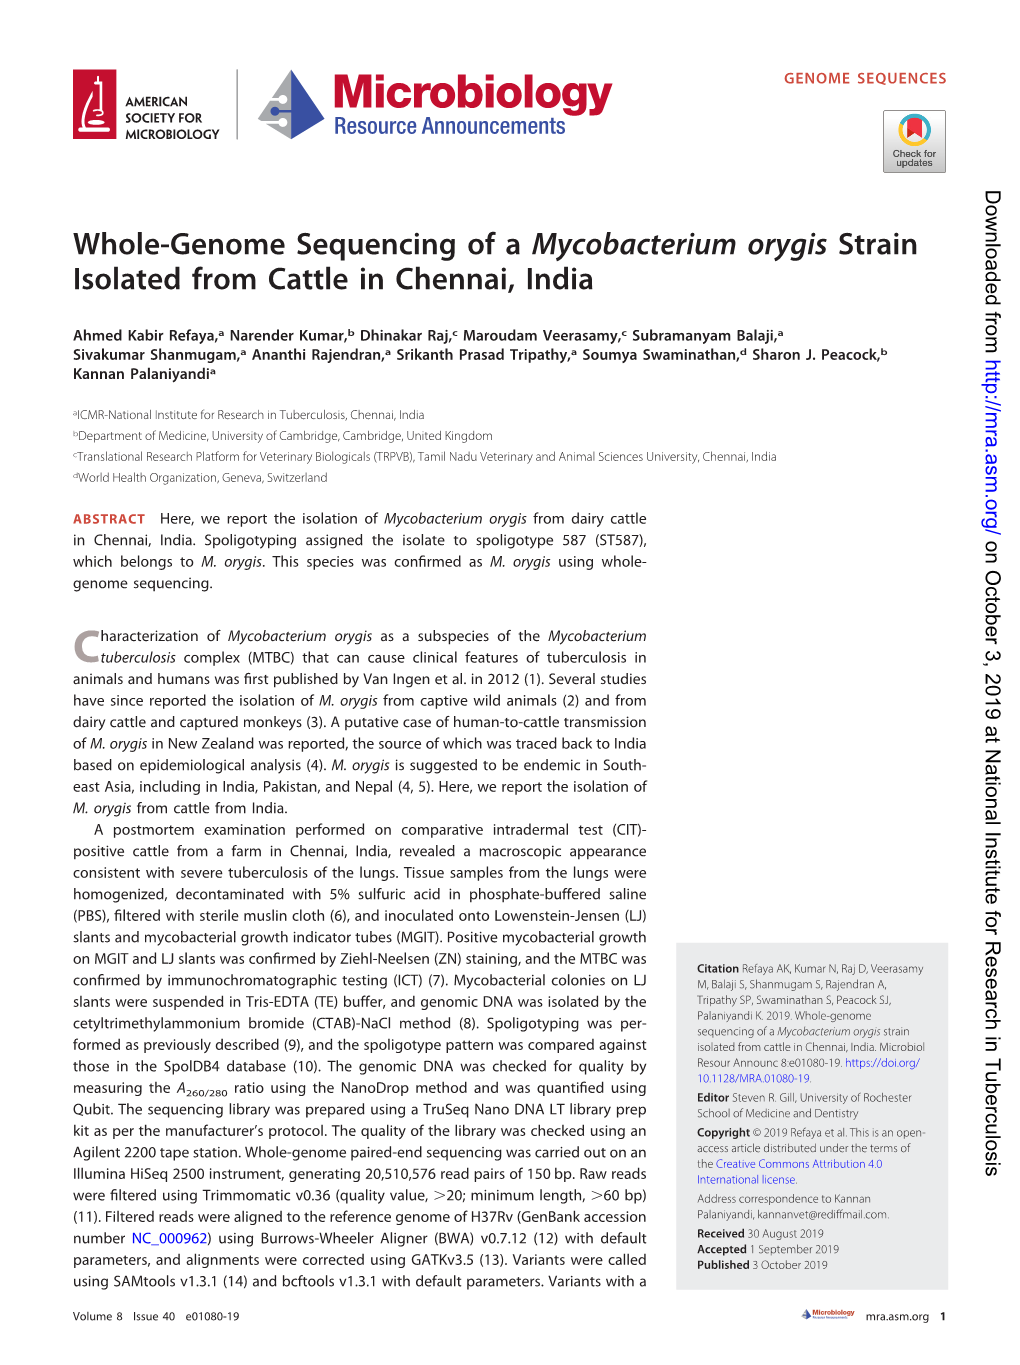 Whole-Genome Sequencing of a Mycobacterium Orygis Strain Isolated from Cattle in Chennai, India